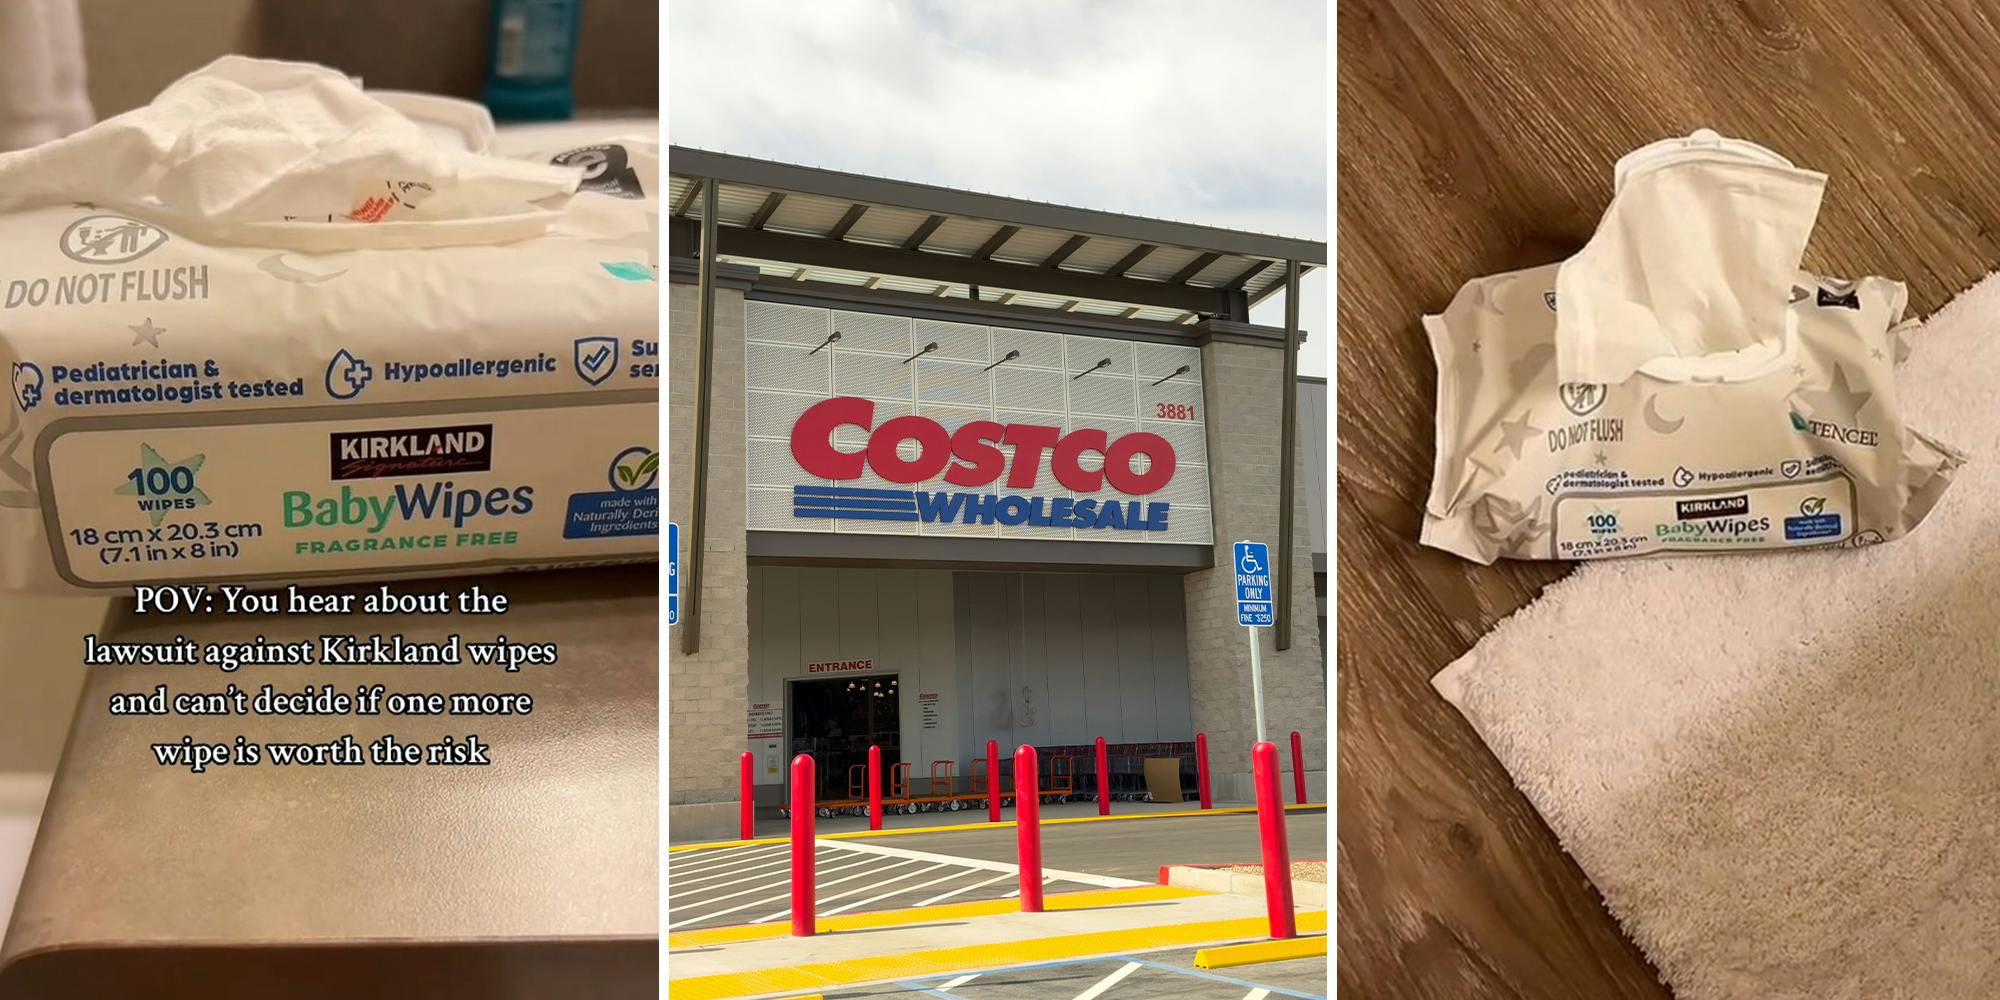 Why are Costco shoppers ditching their Kirkland wipes?